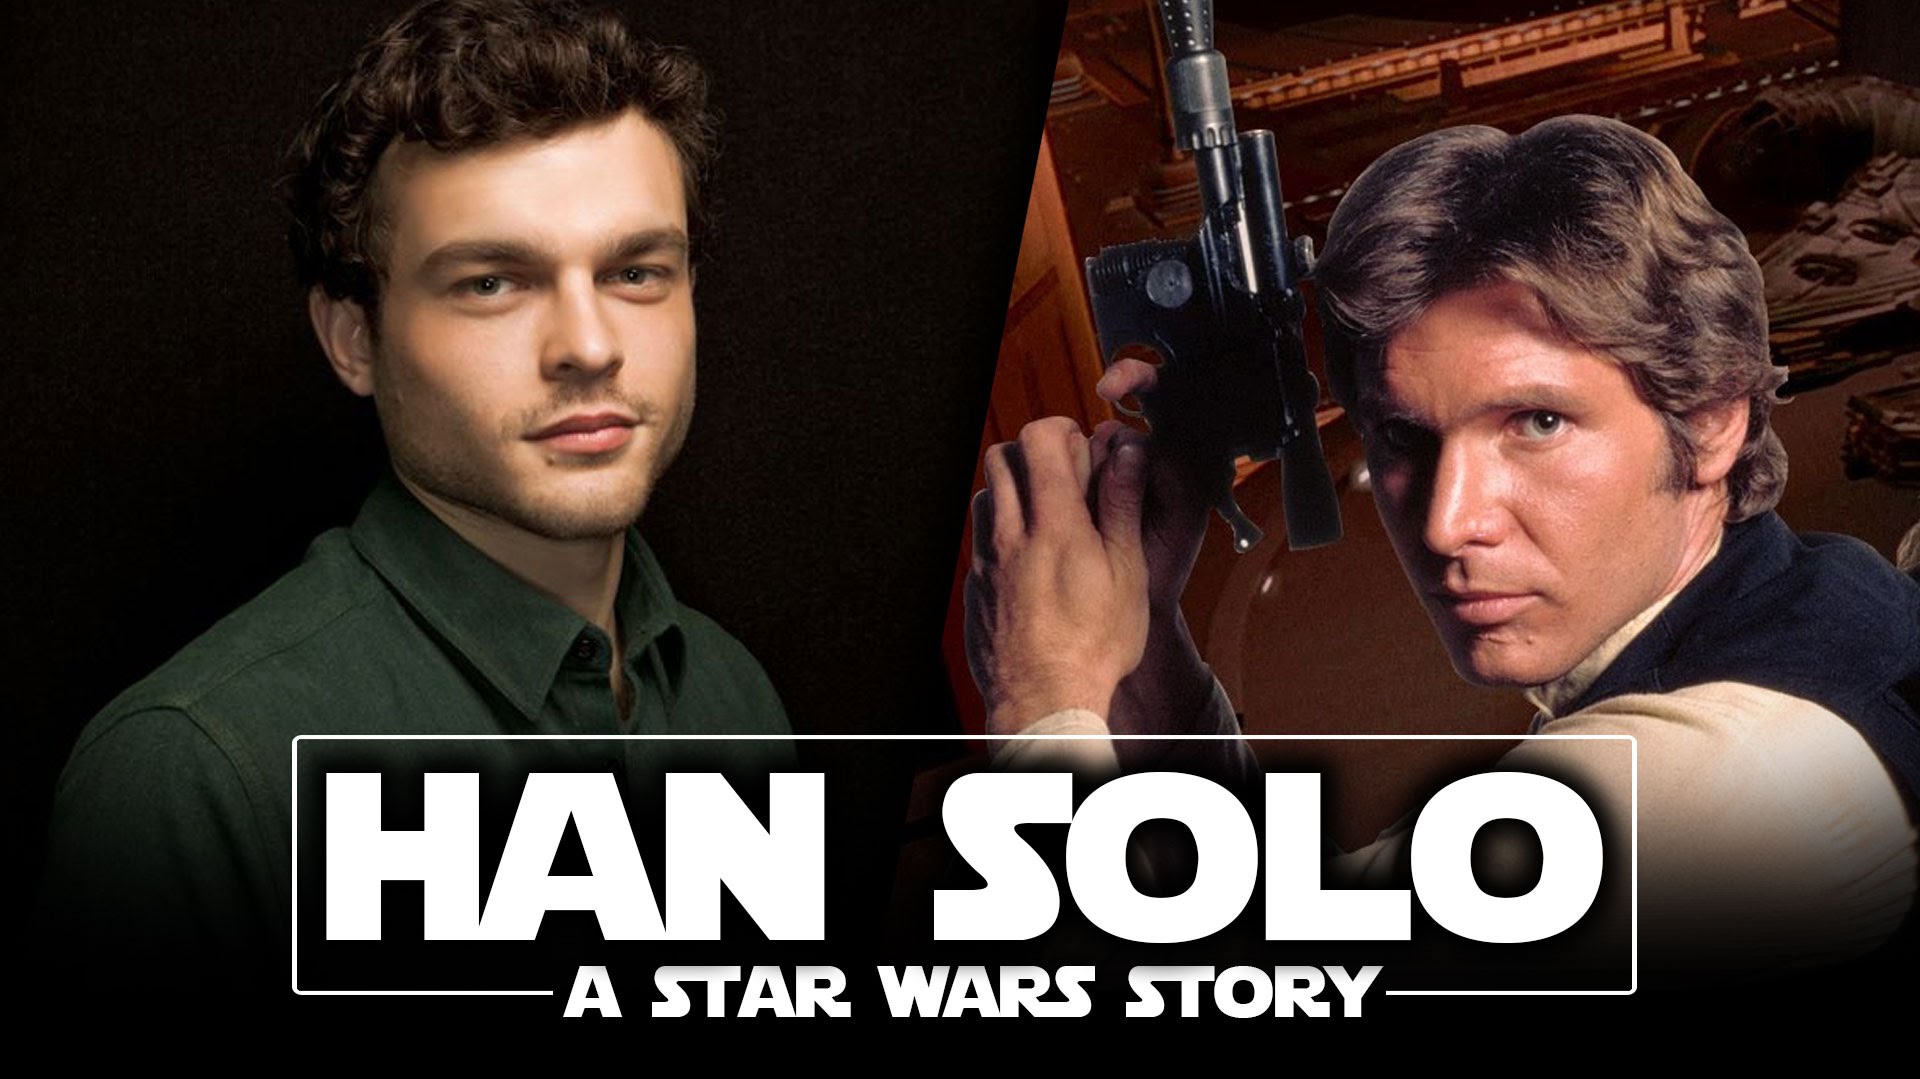 Han Solo - A Star Wars Story